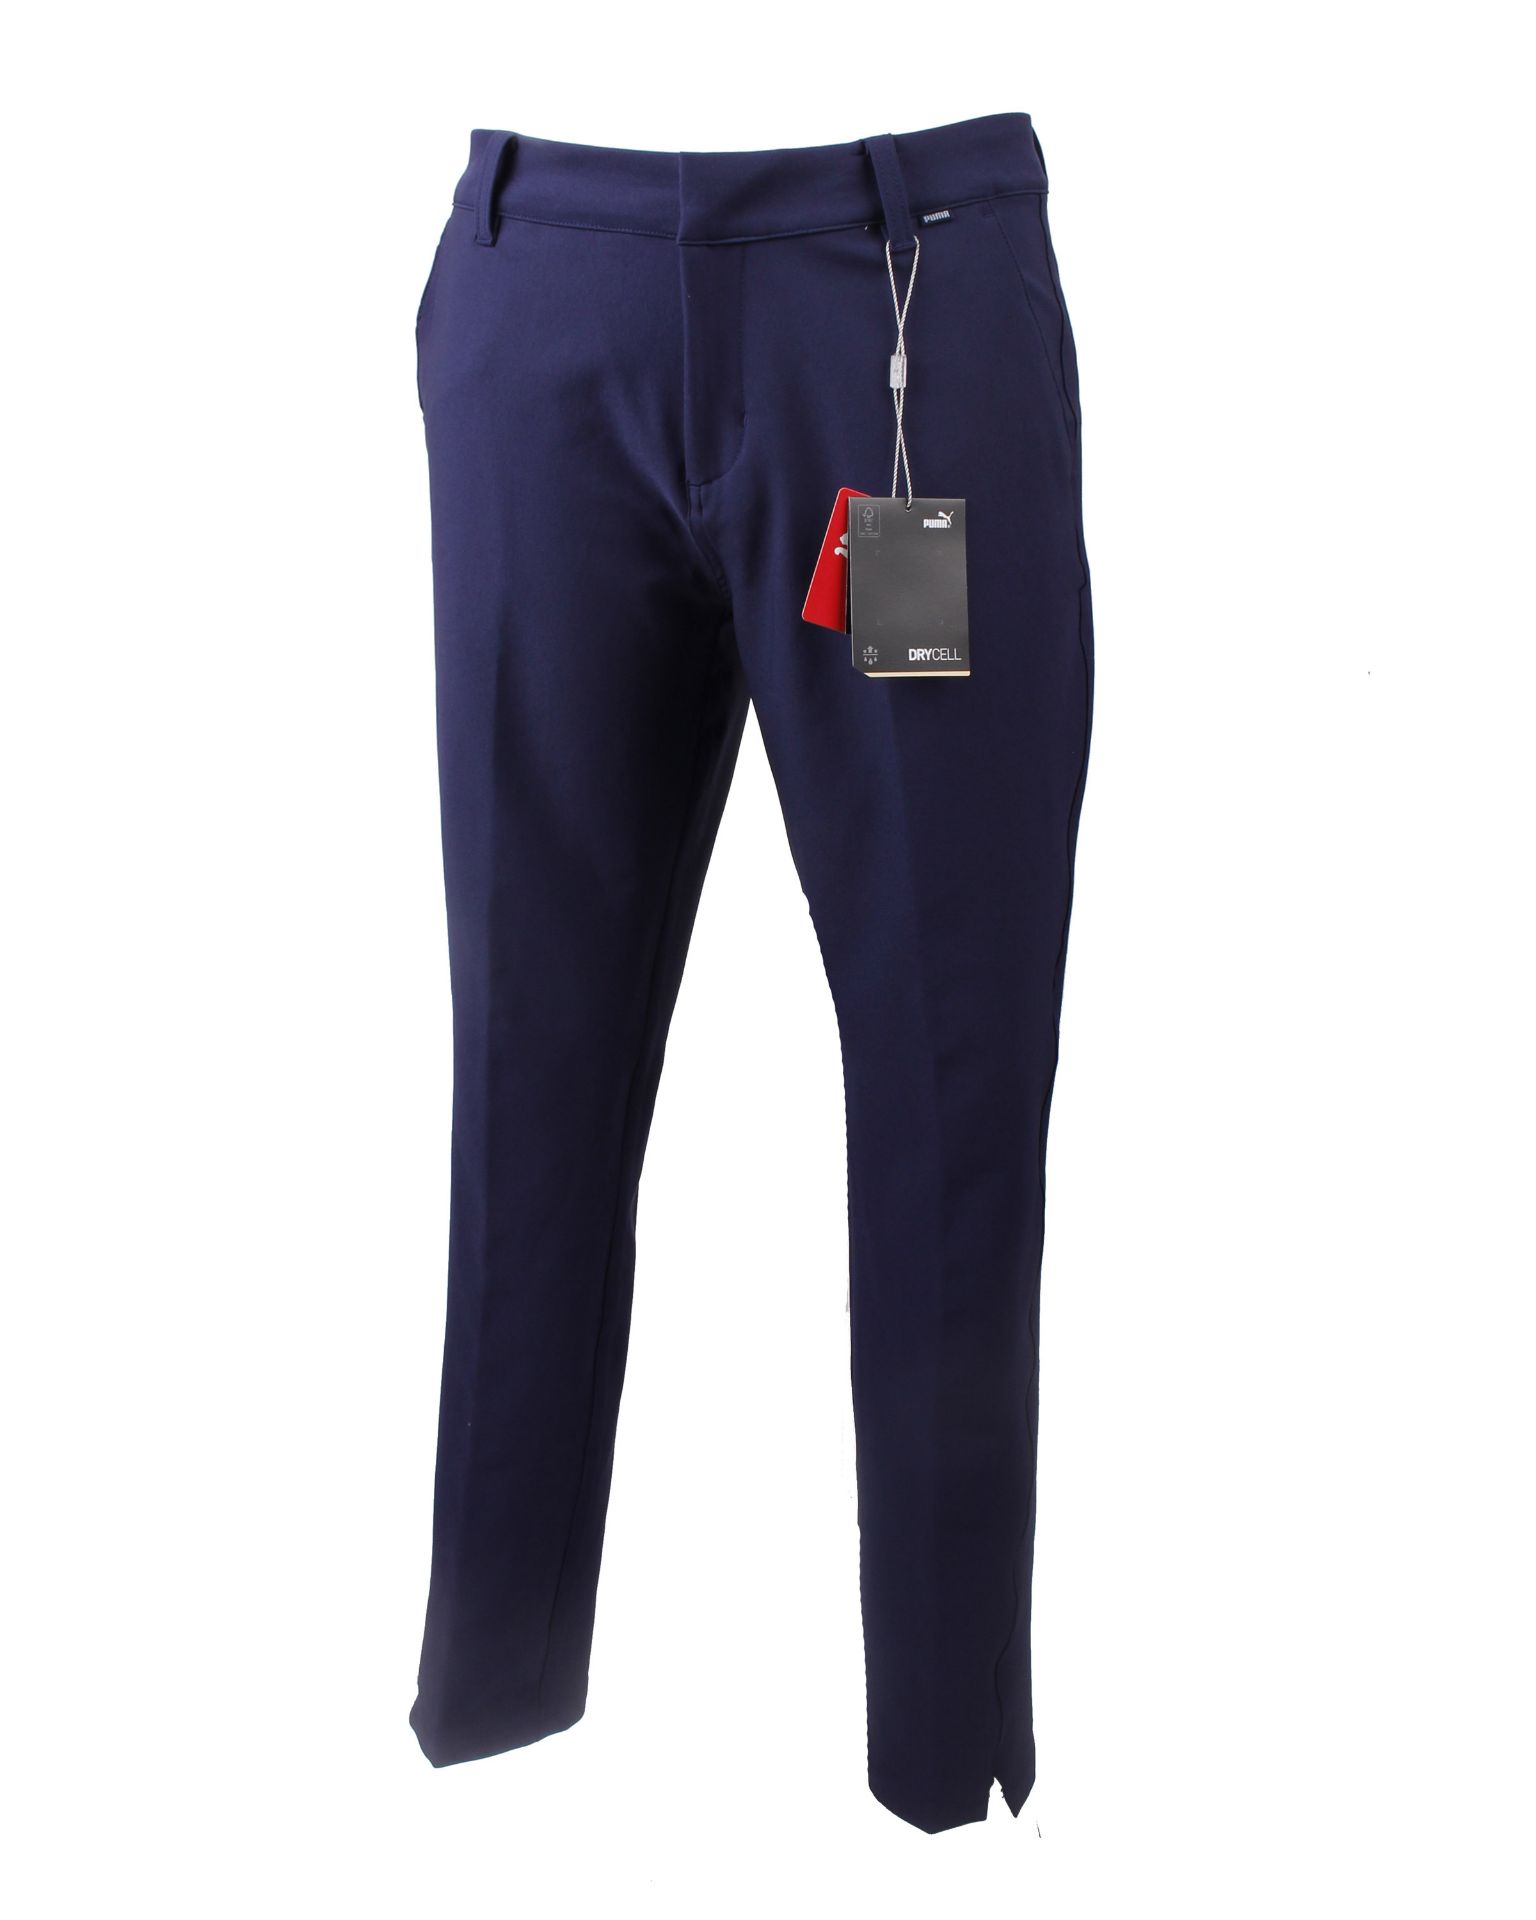 Seven pairs of men's as new Puma DryCell golf trousers in peacoat (Three EU L, two EU XL and two - Image 2 of 3